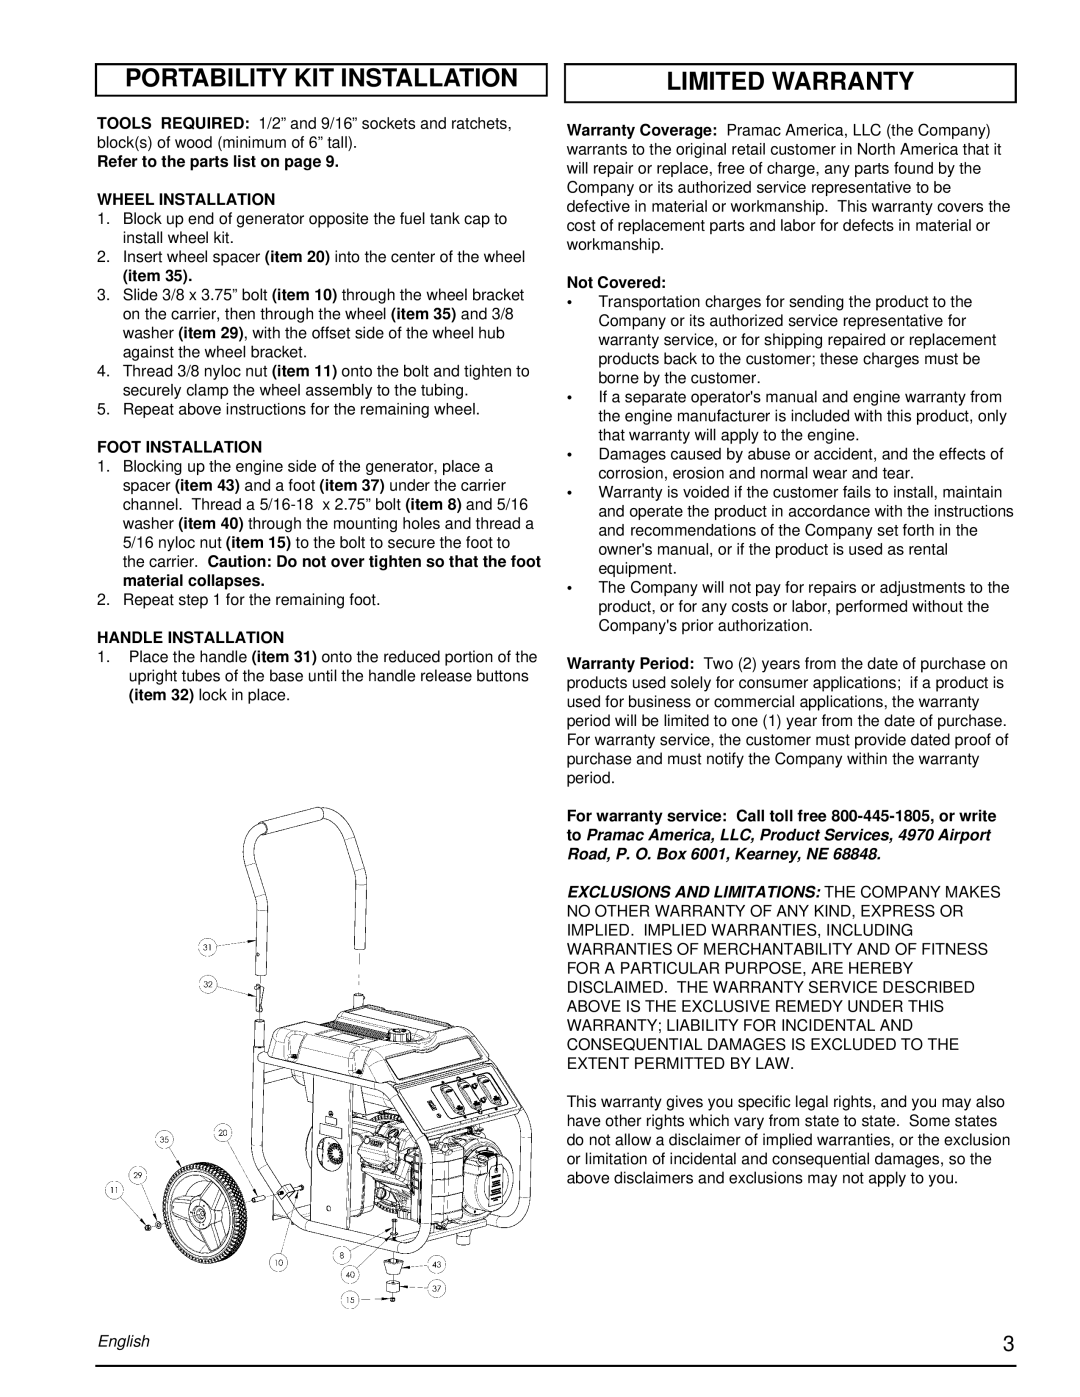 Powermate PM0675700.04 Portability Kit Installation, Limited Warranty, Refer to the parts list on page, Wheel Installation 